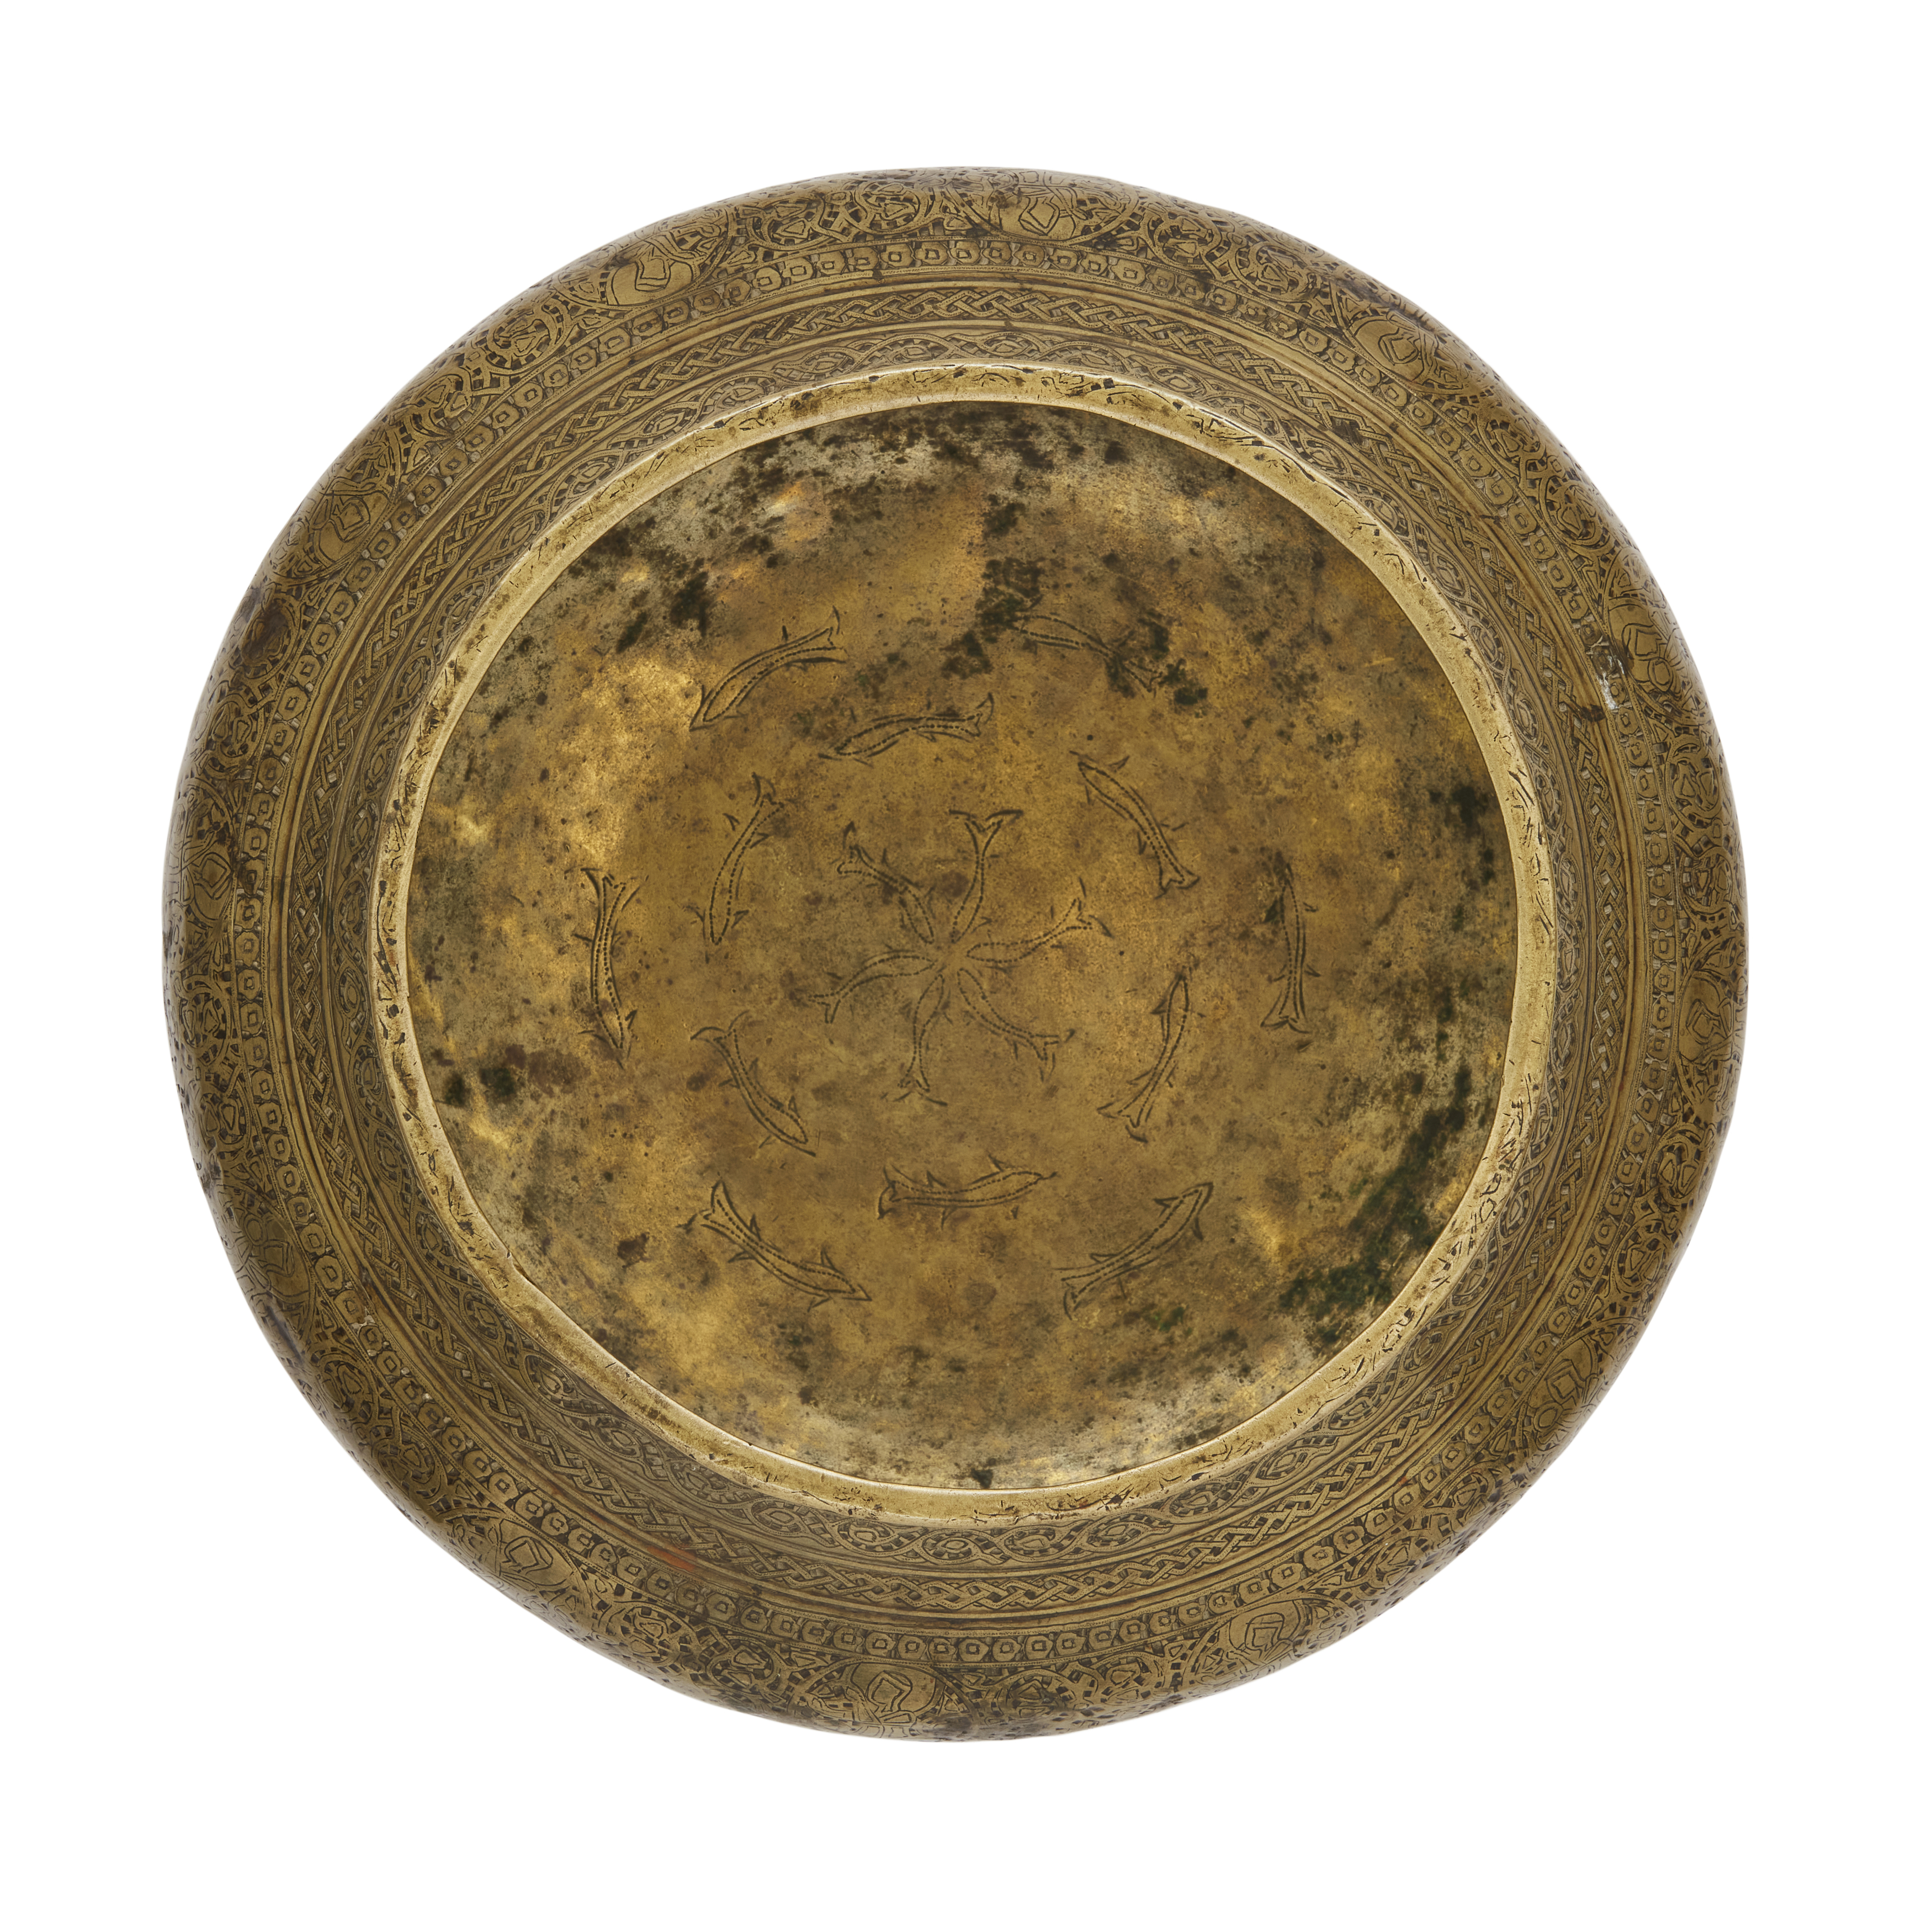 To Be Sold With No Reserve A silver inlaid engraved copper alloy bowl, Fars, western Iran, 14th... - Image 3 of 6